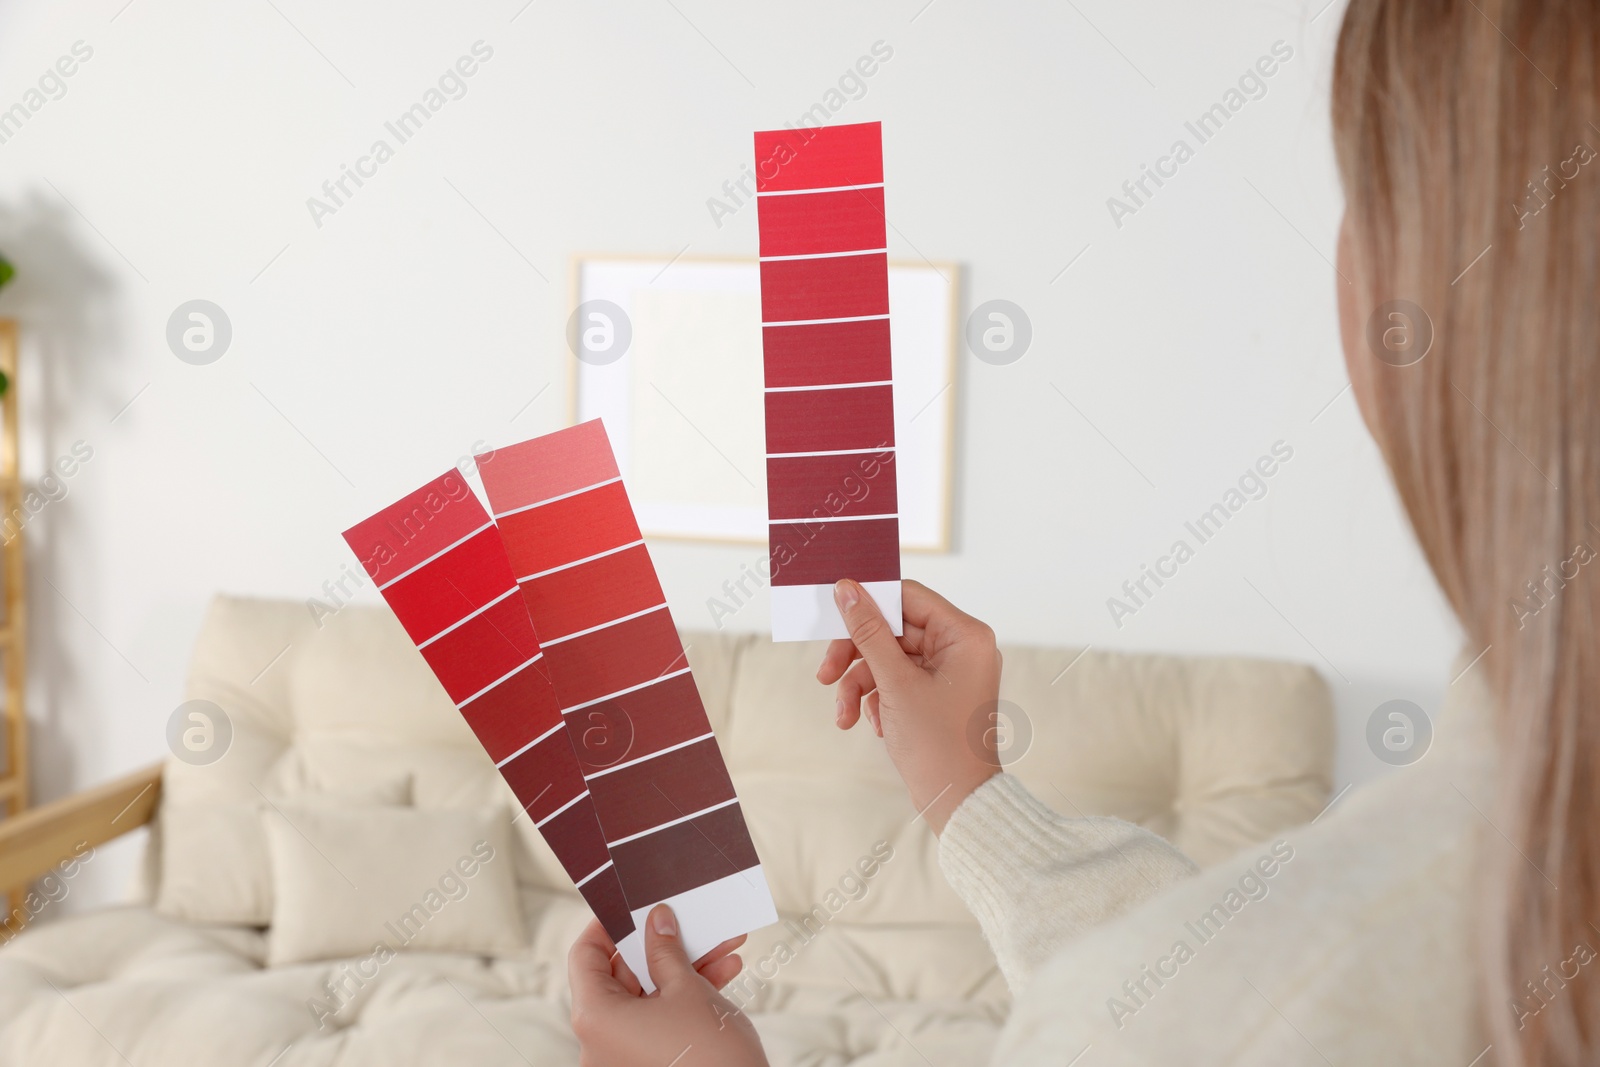 Photo of Woman choosing color for wall in room, focus on hands with paint chips. Interior design